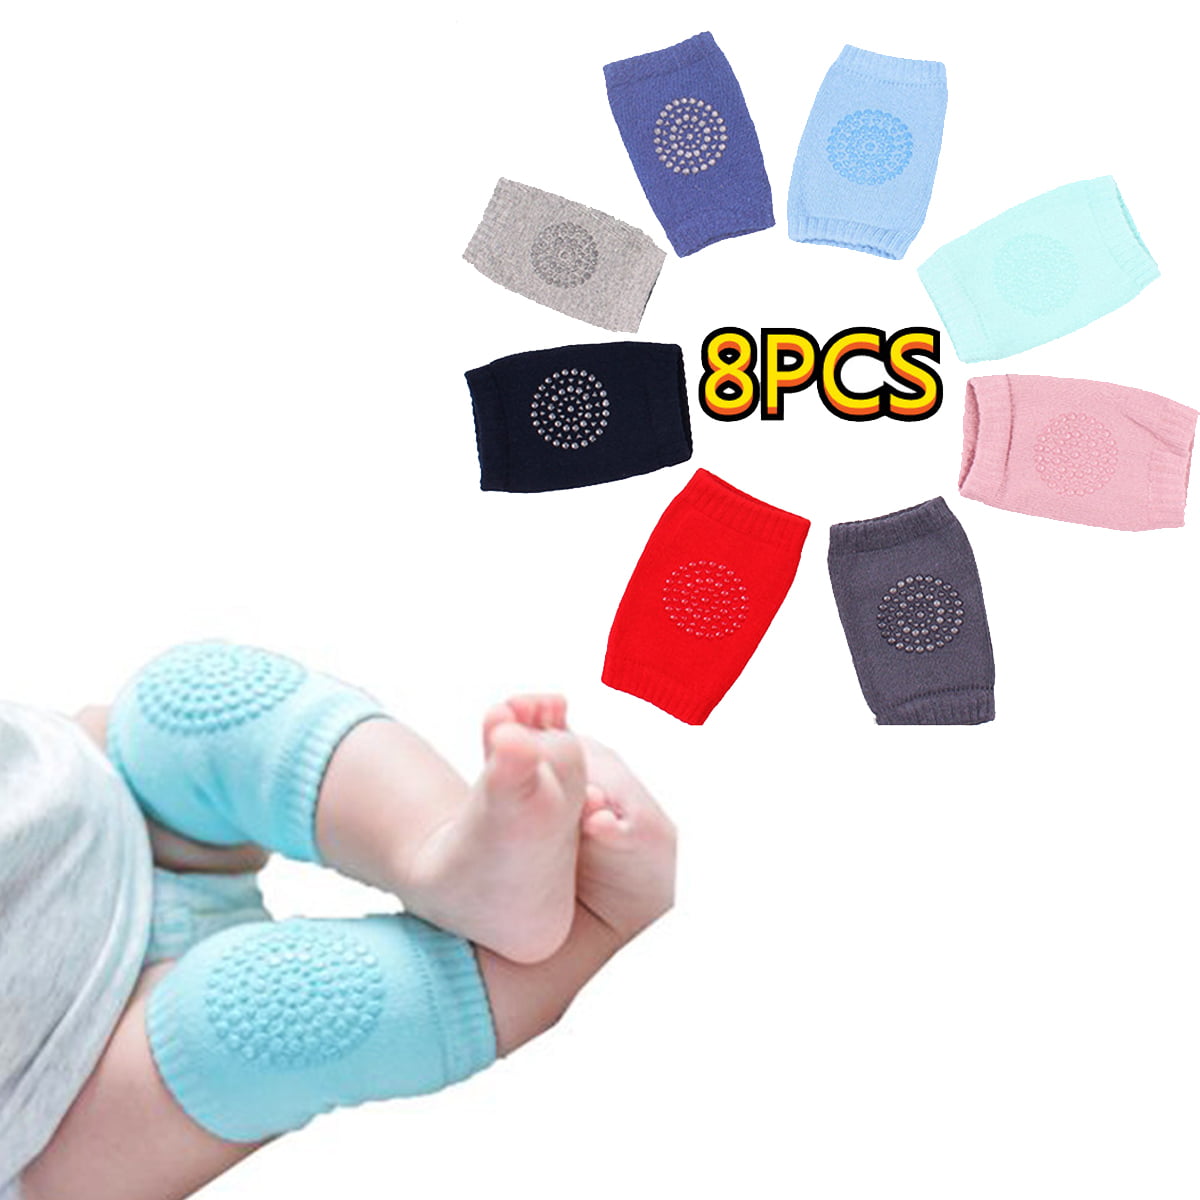 2pcs Baby Crawling Knee Pads Infant Toddler Safety Cushion Protector 11x8x0.4 #D 